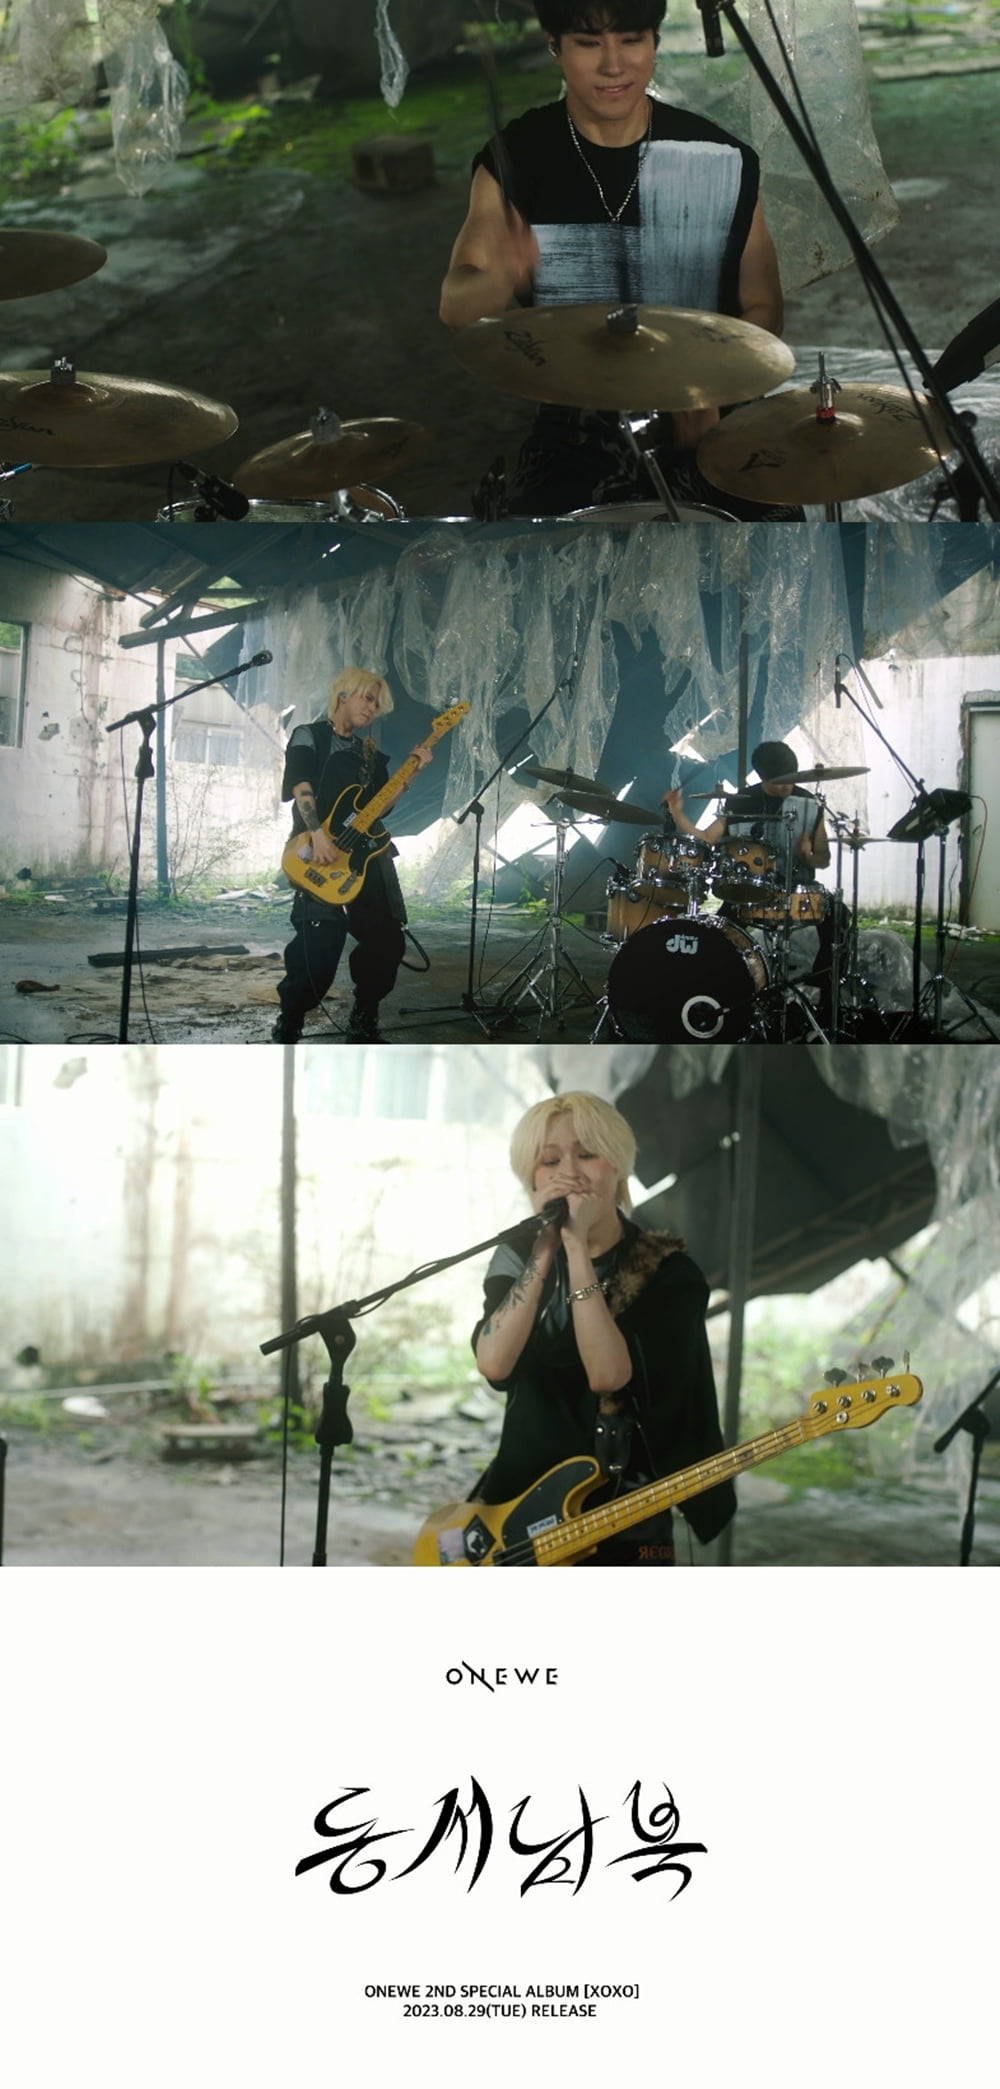 ONEWE unveils performance MV teaser for b-side song 'East, West, South, North' in new album